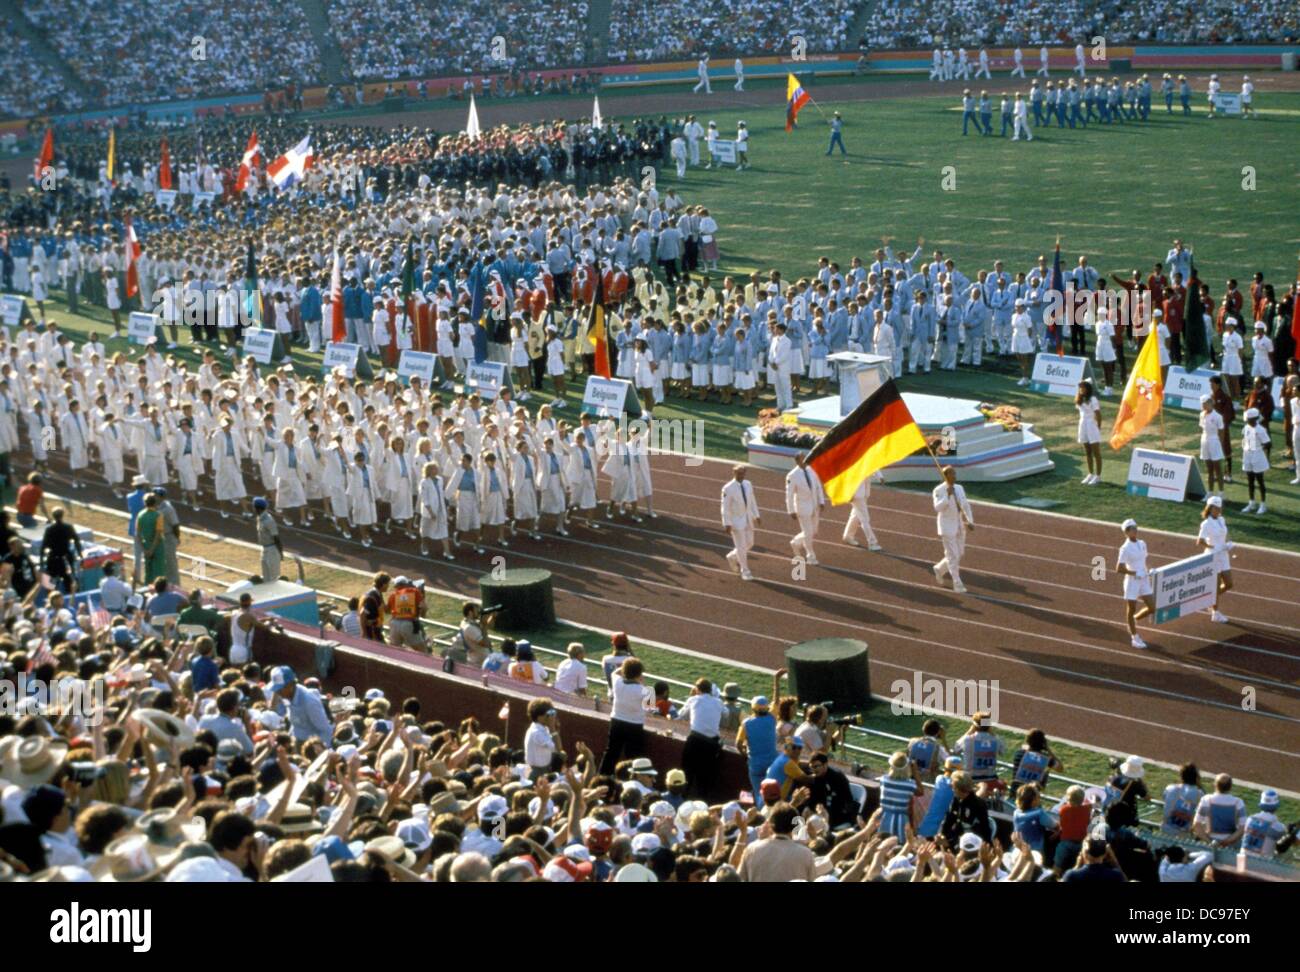 The team of the Federal Republic of Germany enters the Coliseum in Los Angeles during the entry of the nations at the XXIII Olympic Games in 1984 in Los Angeles, which will take place until the 12th of August in 1984. Stock Photo